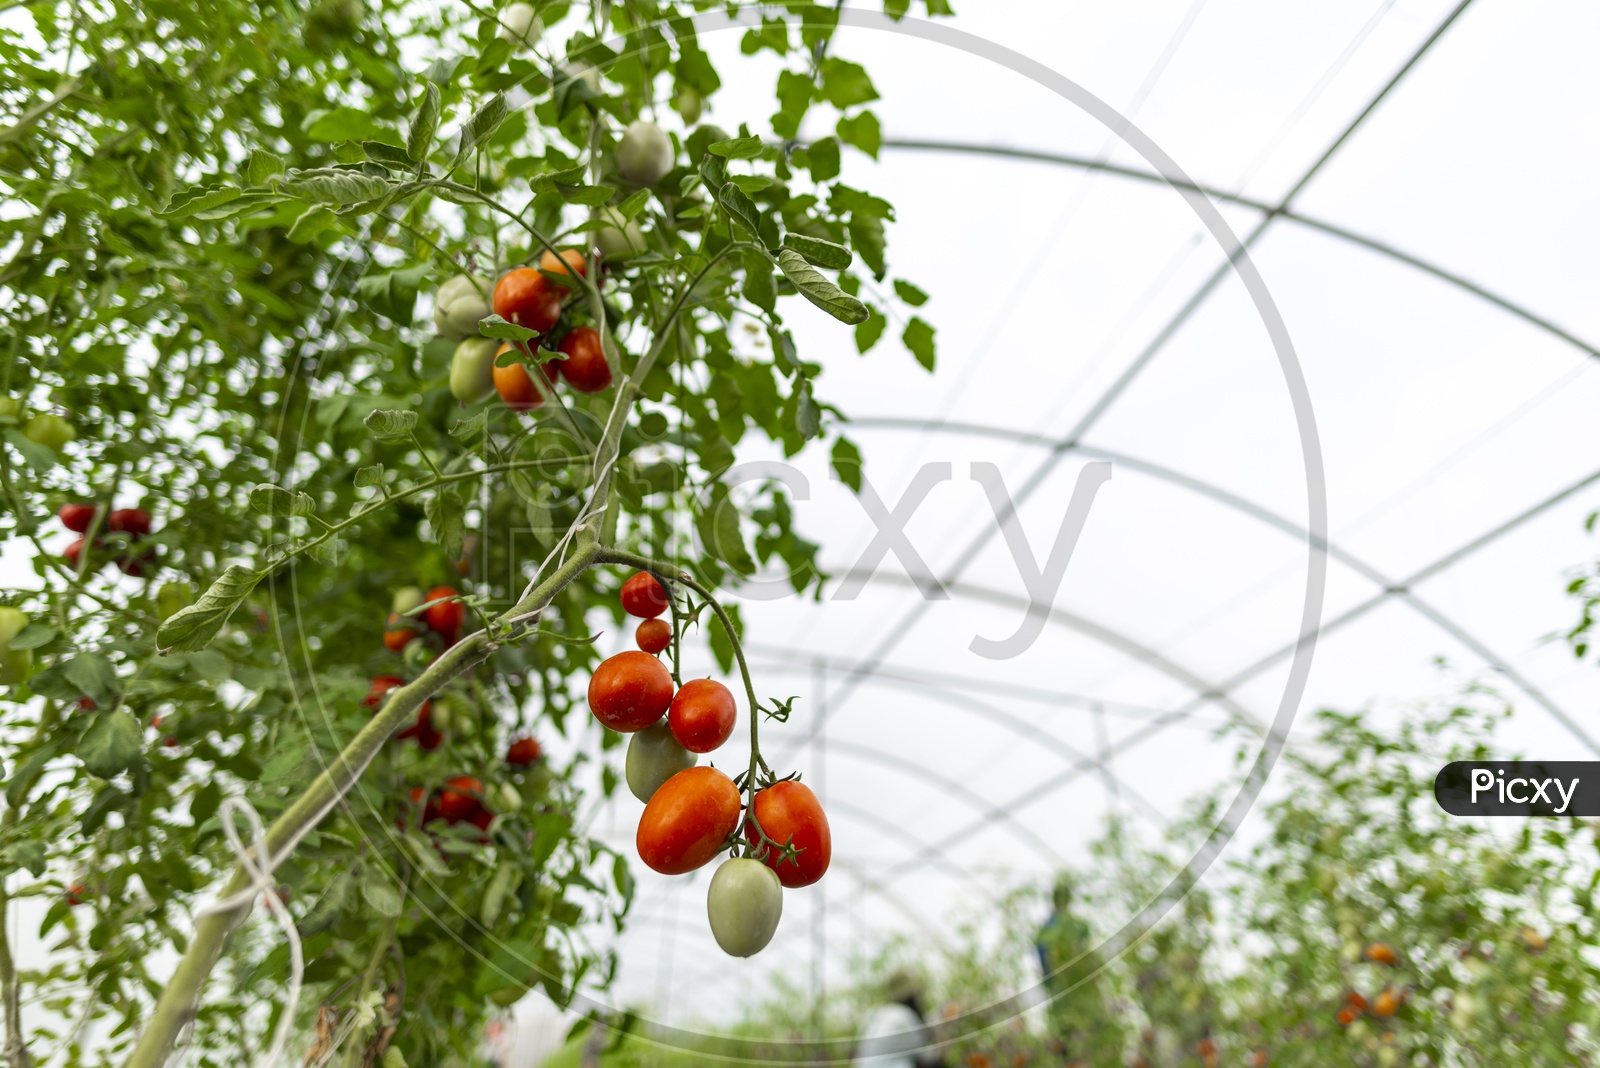 Cultivation Of Tomatoes in Greenhouses  Closeup